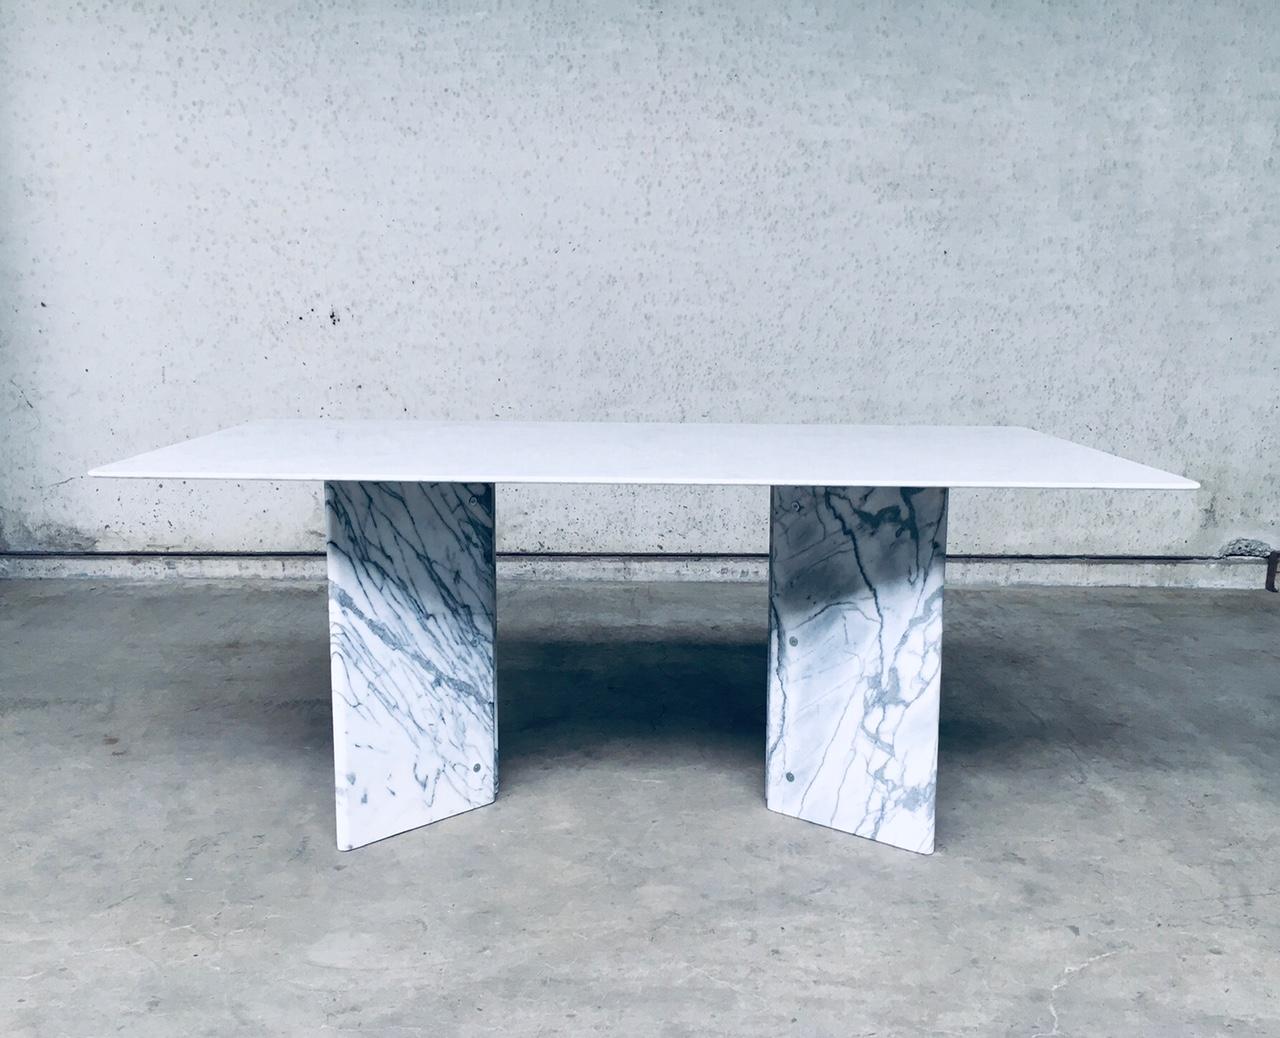 Vintage Postmodern Italian Design Carrara Marble Dining Table, made in Italy 1970's. No maker markings or designer found. Thin marble top on 2 V shape marble bases. Impressive dining table in very good condition. Table top has signs of use and some